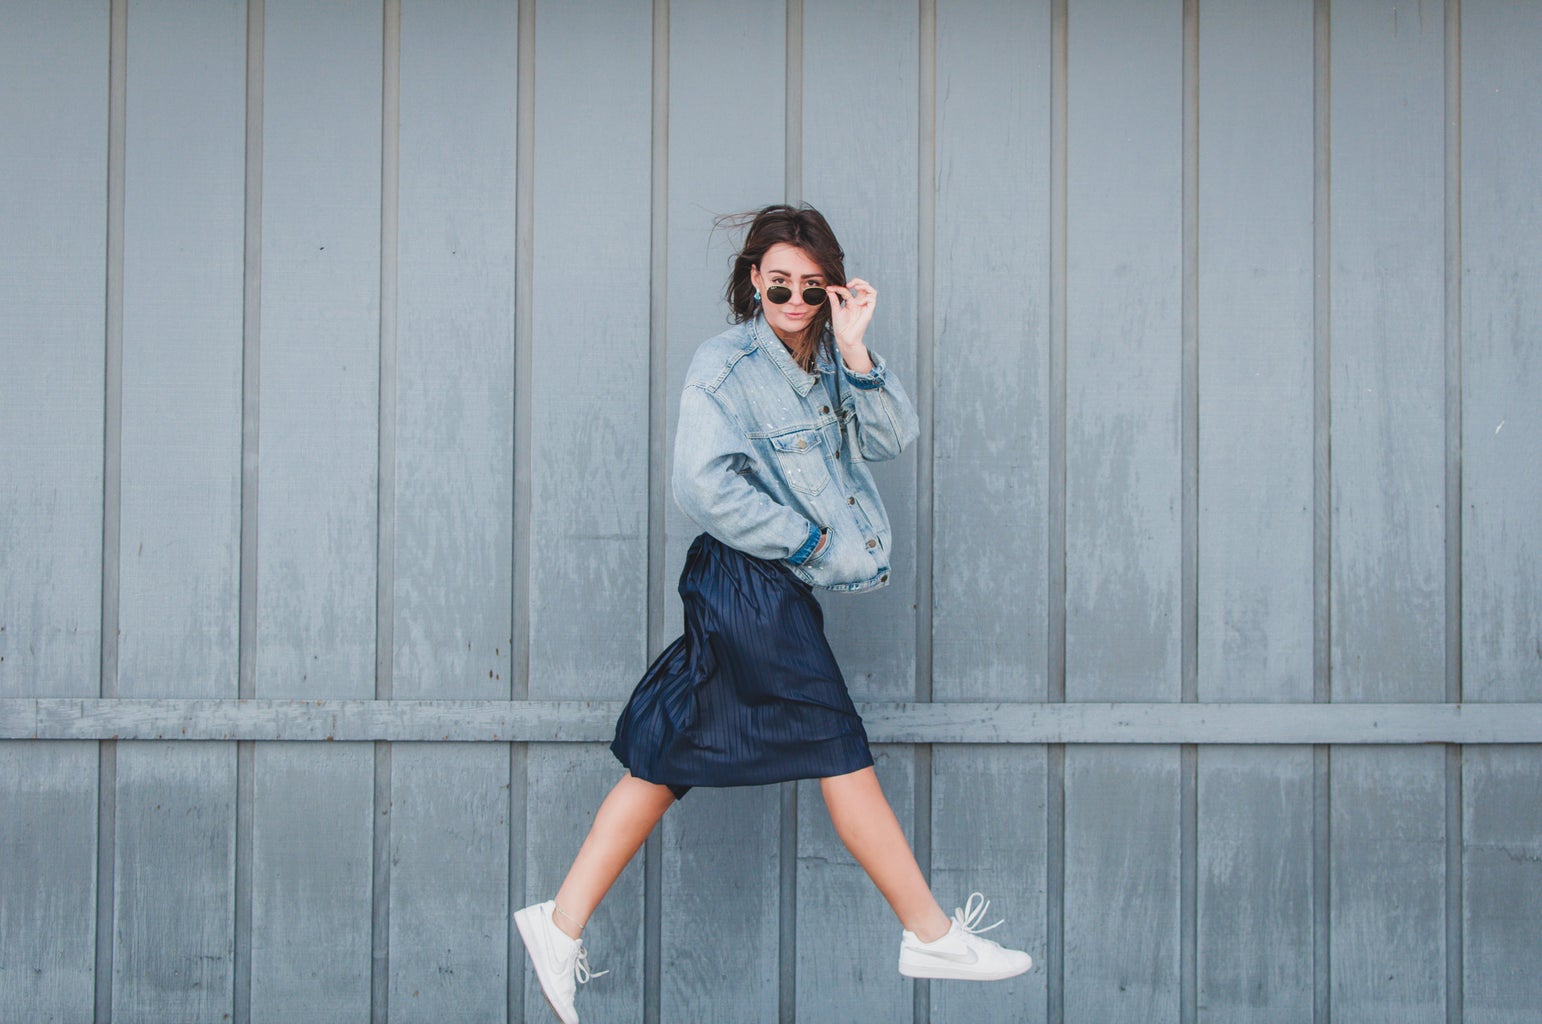 girl with jean jacket and skirt jumping 1